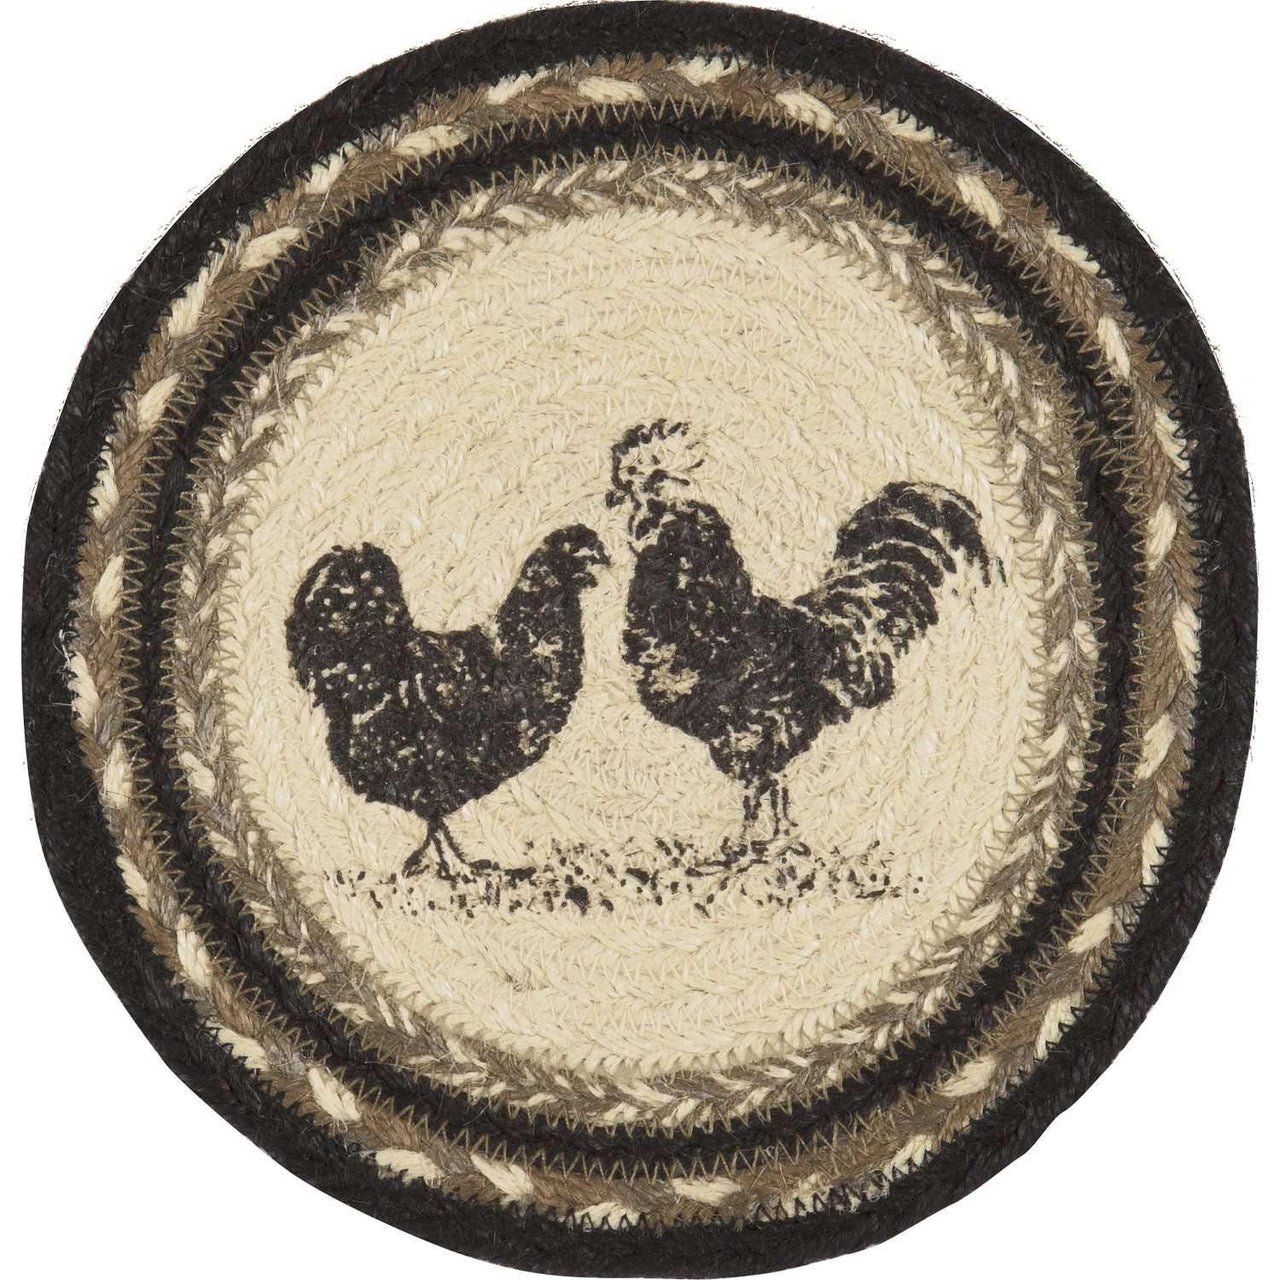 Sawyer Mill Charcoal Poultry Jute Trivet 8" VHC Brands - The Fox Decor